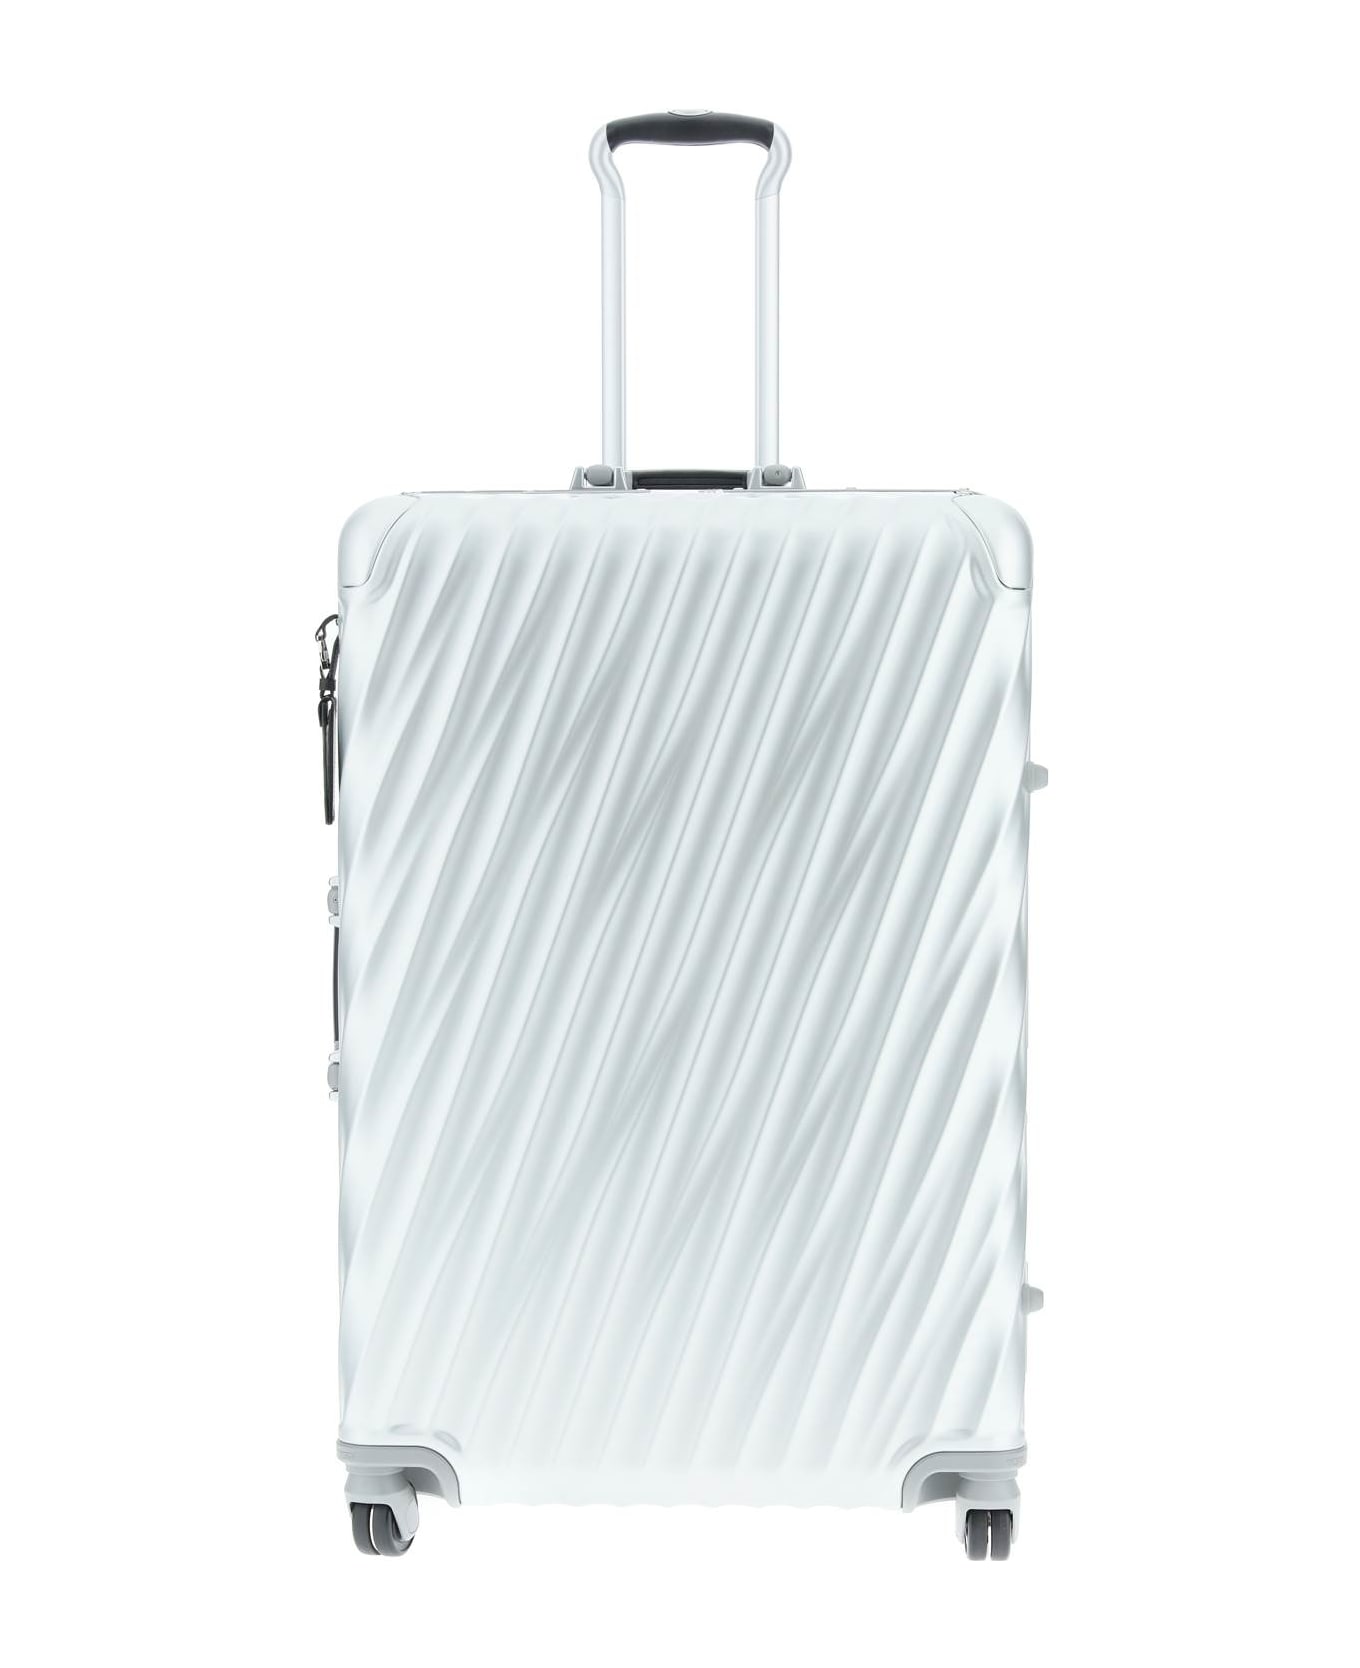 Tumi 19 Degree Aluminium Extended Trip Packing Case - SILVER (Silver)